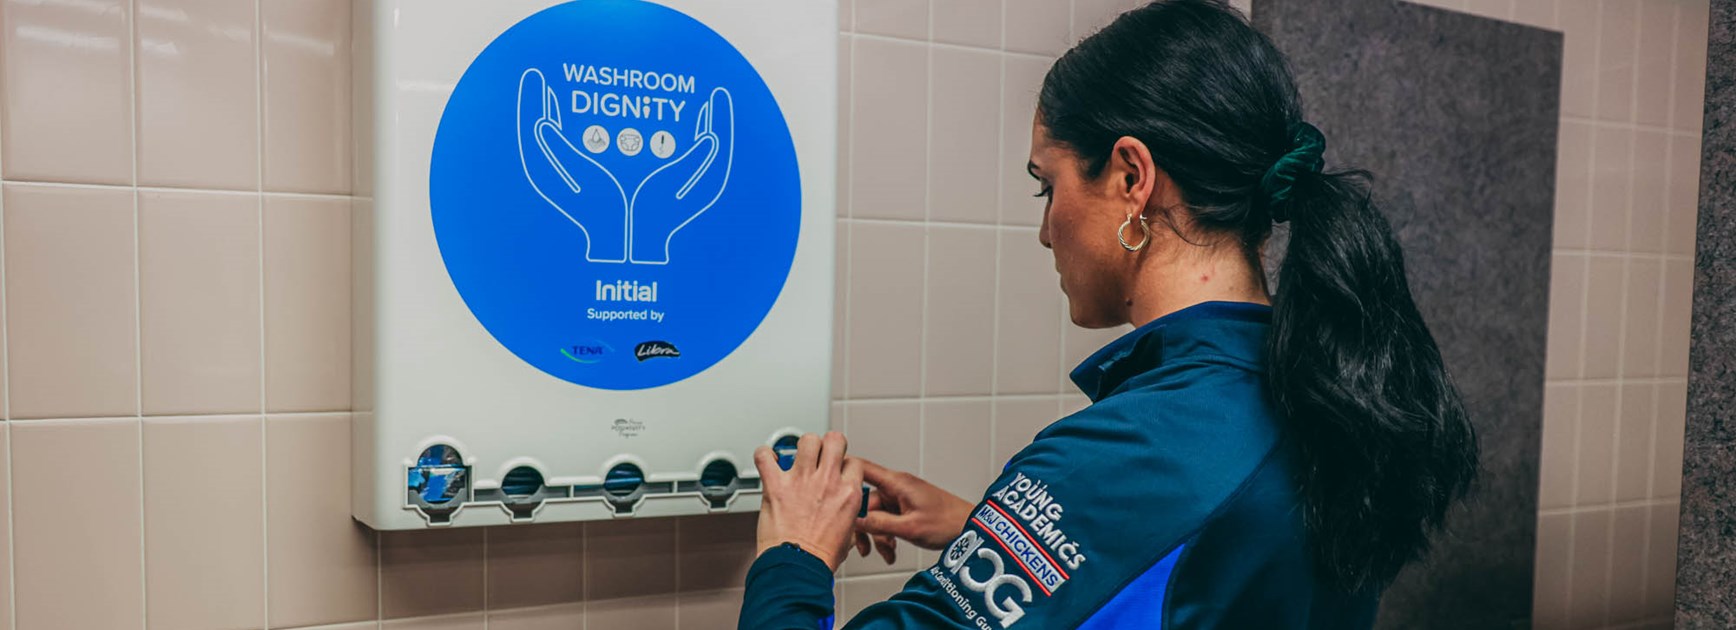 Bulldogs Join Forces With Rentokil Initial for Washroom Dignity